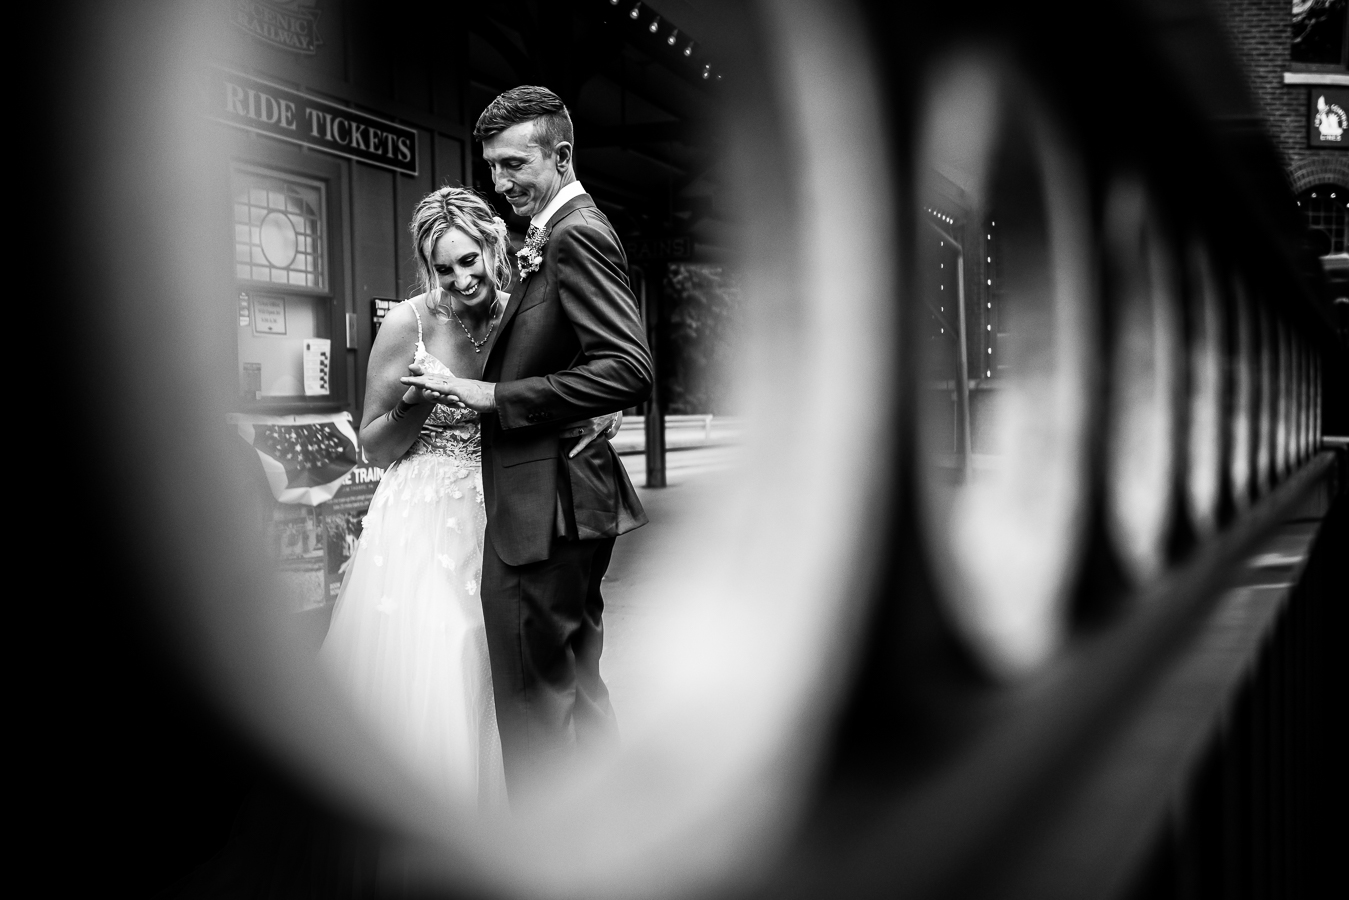 Creative wedding photographer, lisa rhinehart, captures this creative, unique black and white image of the bride and groom looking at each others rings caught through circles on the raining for a unique, creative perspective 